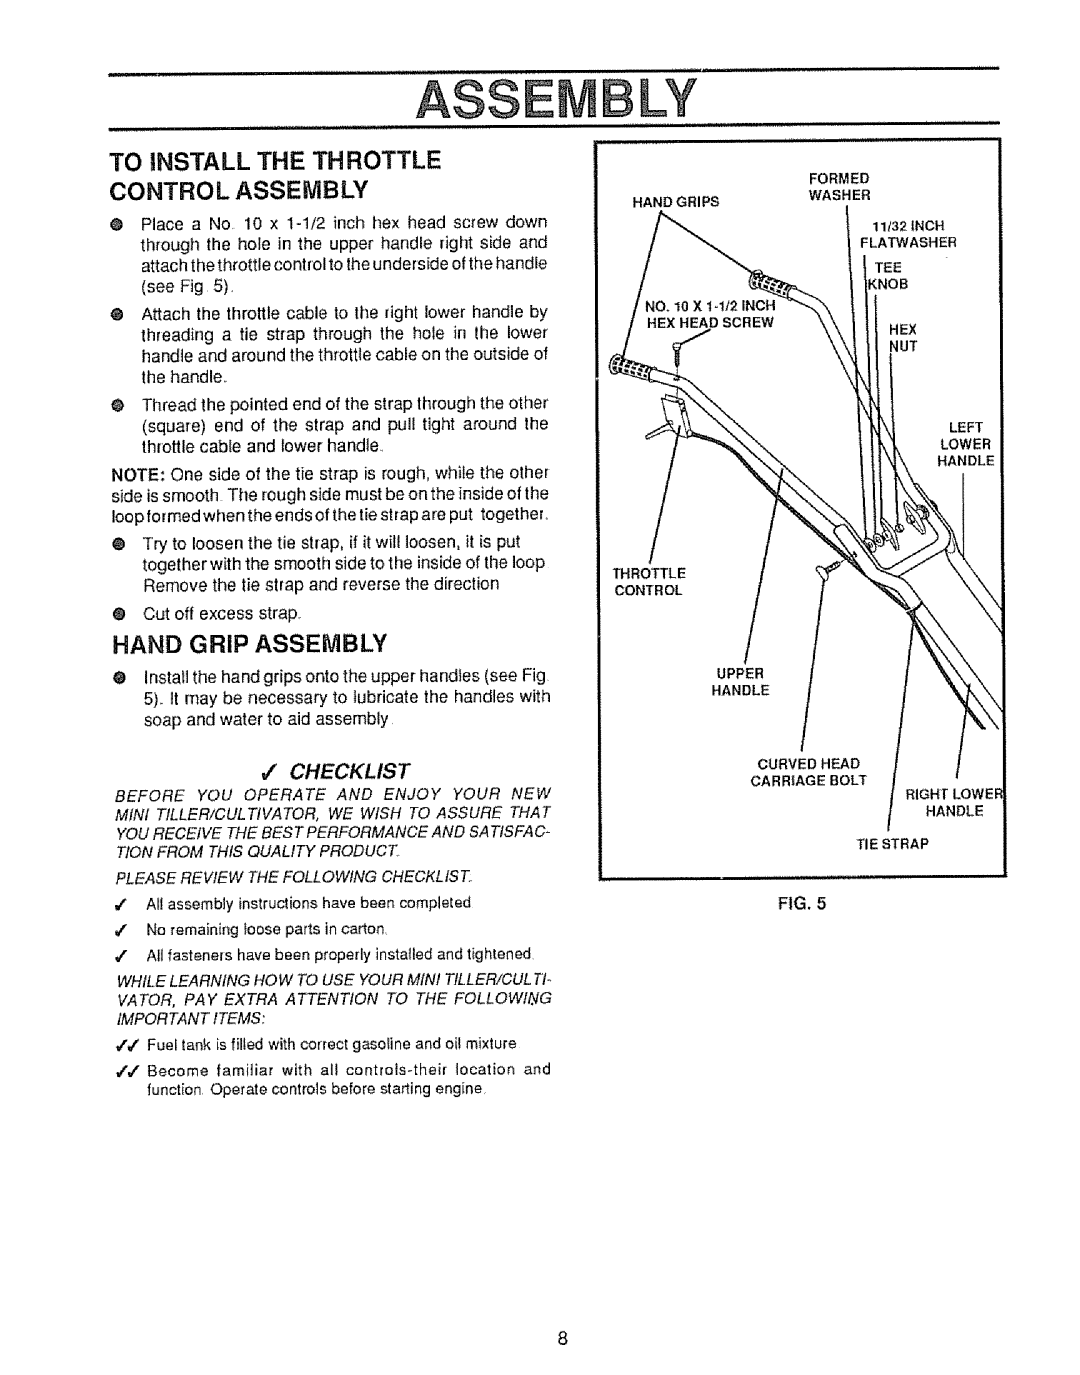 Craftsman 536.7975 manual To Install The Th Rottle Control Assembly, Hand Grip Assembly, f CHECKLIST 